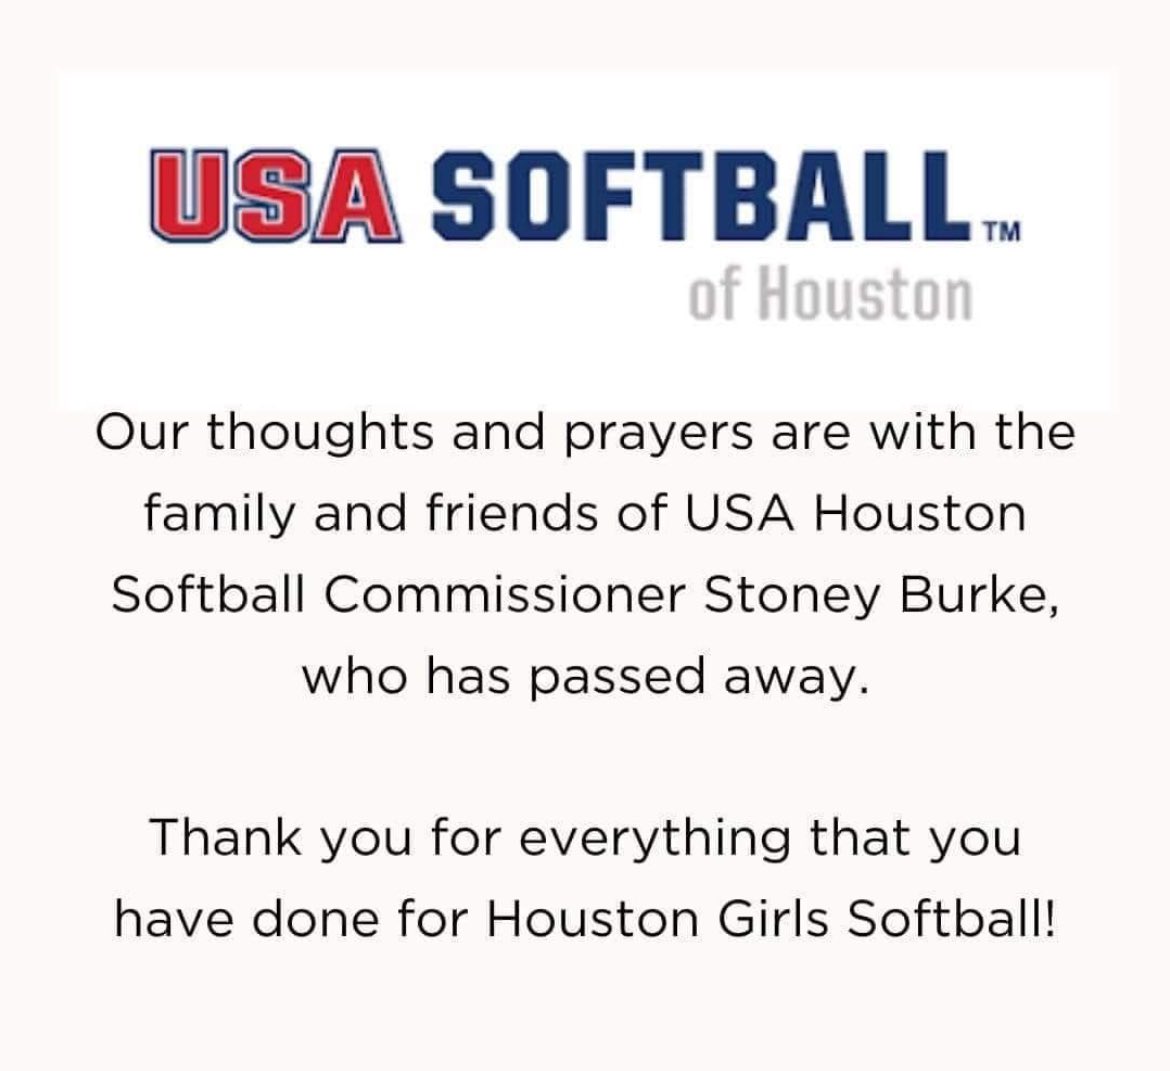 Tough news today! USA/Houston softball lost a great one!! Stoney Burke was a fierce friend and one of the main reasons why myself and countless others had the opportunity to compete for the red, white and blue here in Houston! #sadday @USASoftball